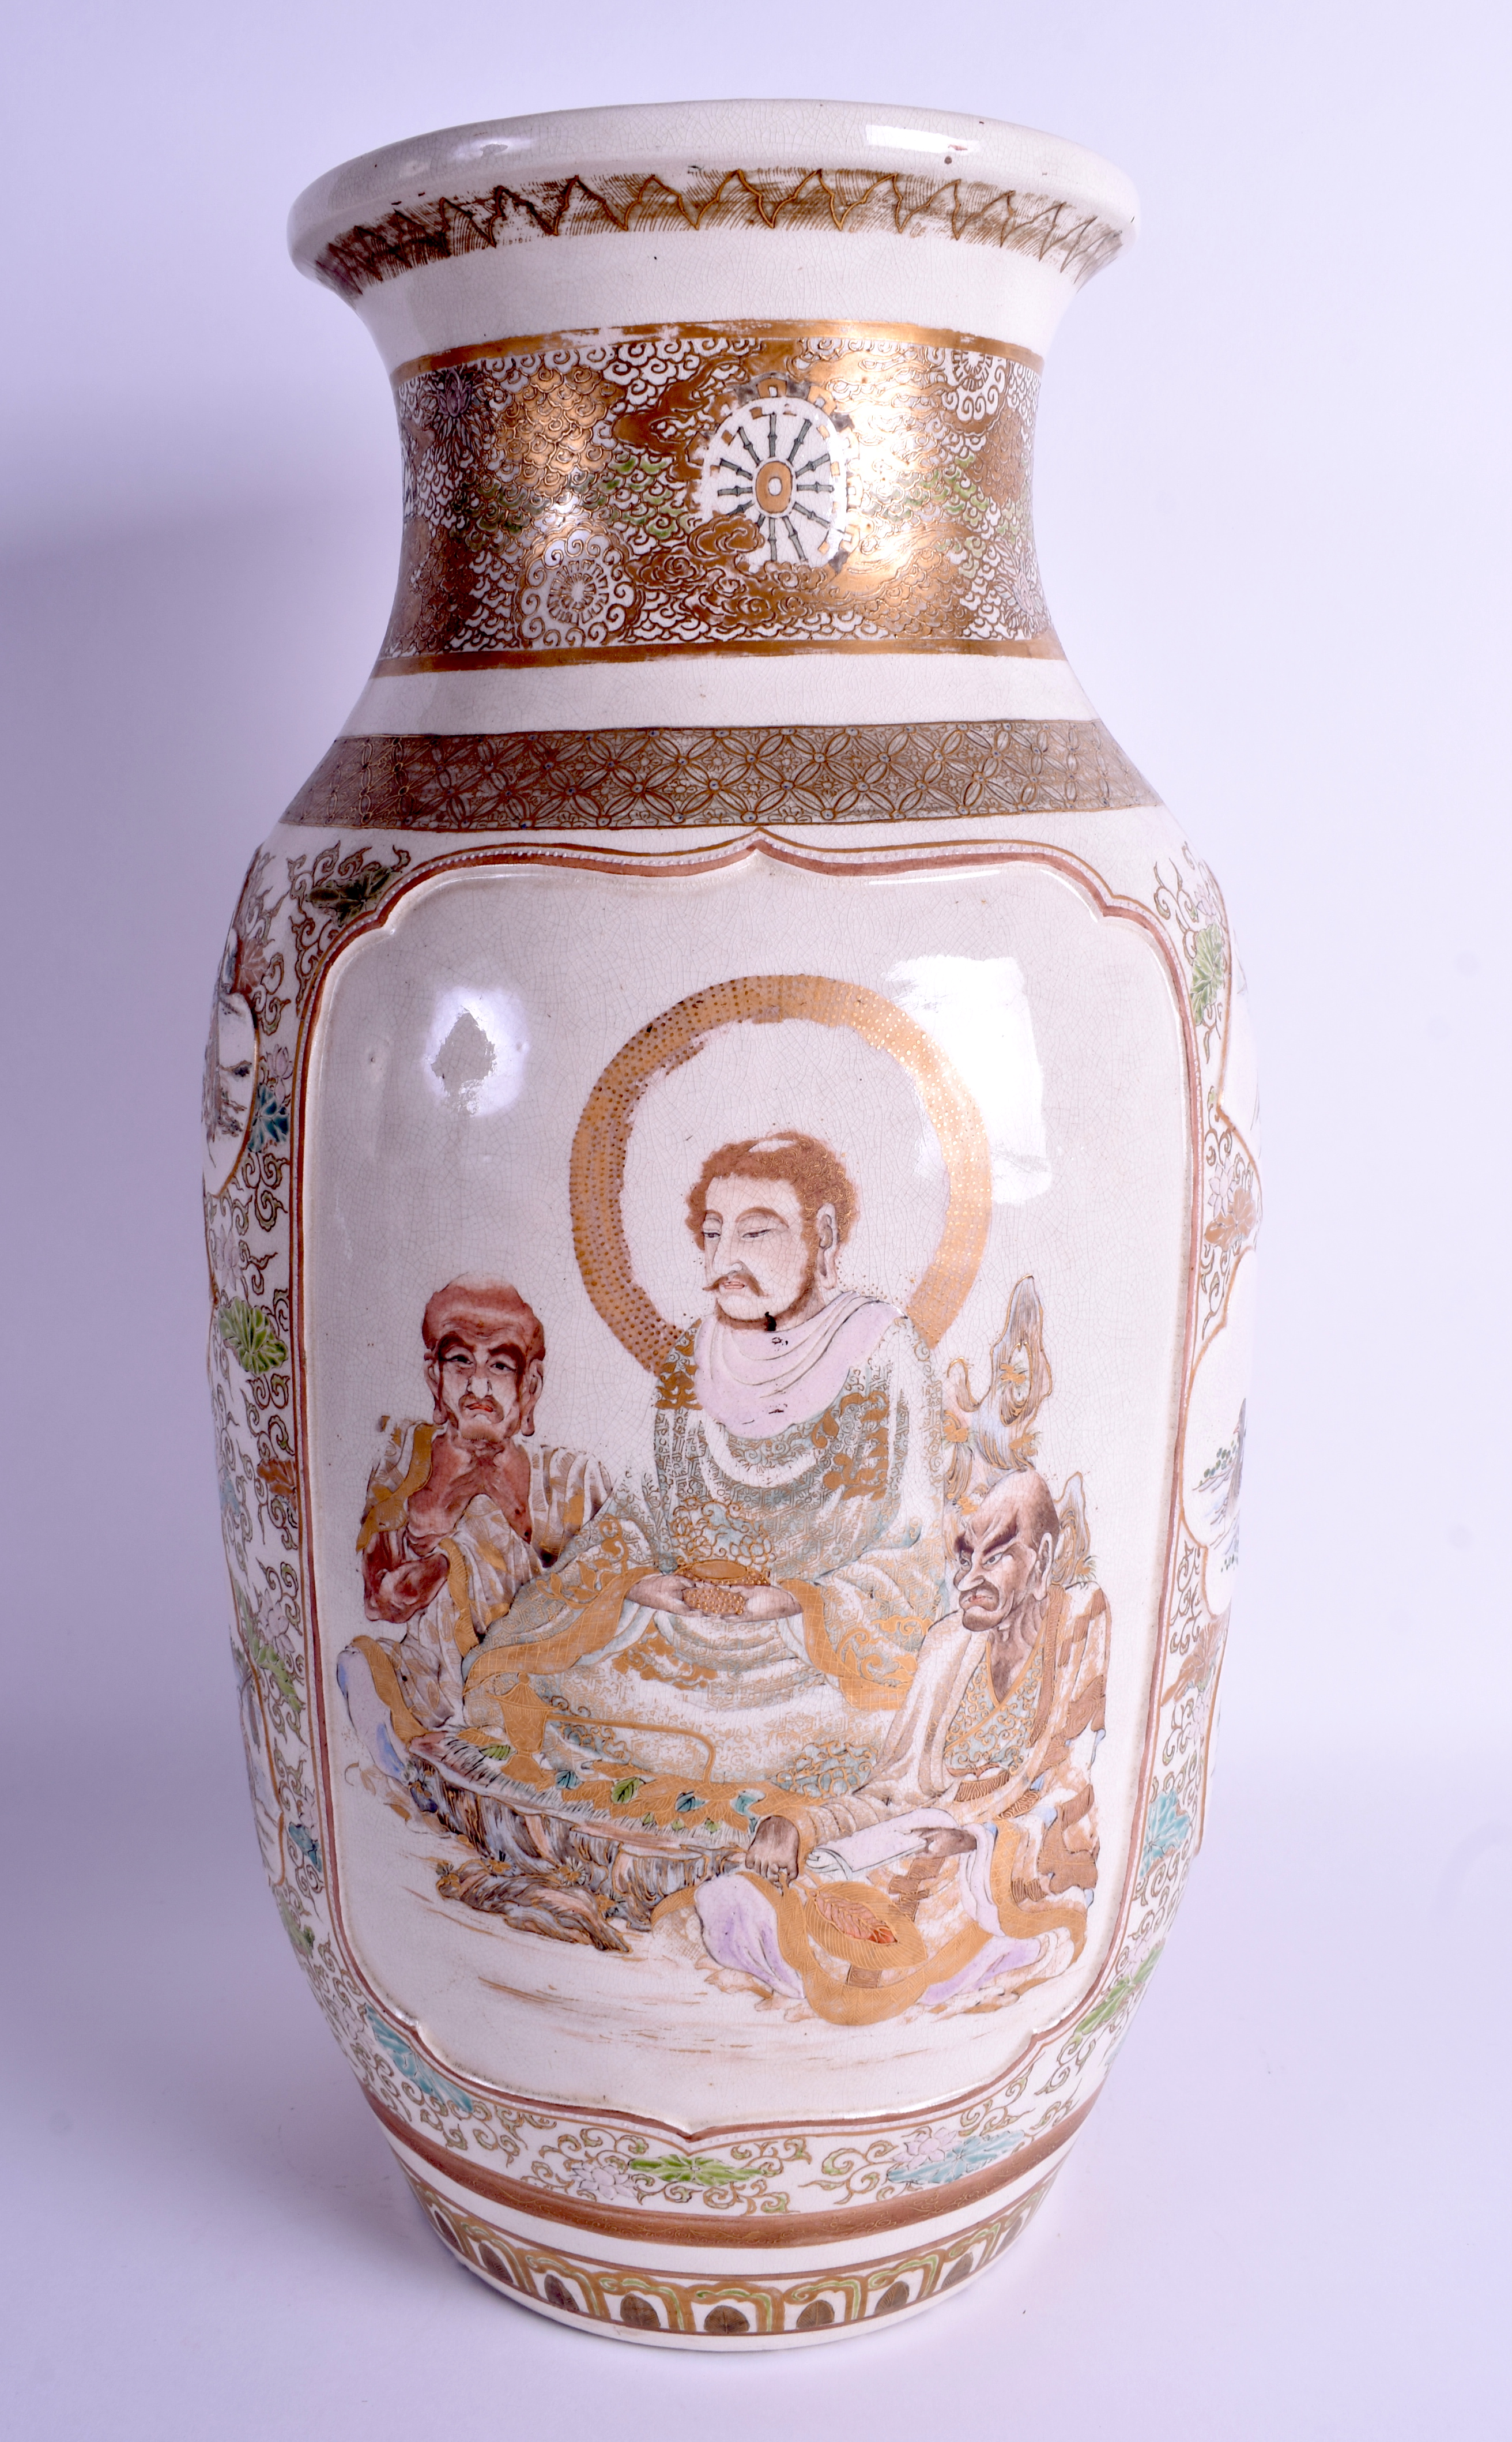 A VERY LARGE 19TH CENTURY JAPANESE MEIJI PERIOD SATSUMA VASE painted with figures and foliage. 46 c - Image 3 of 6